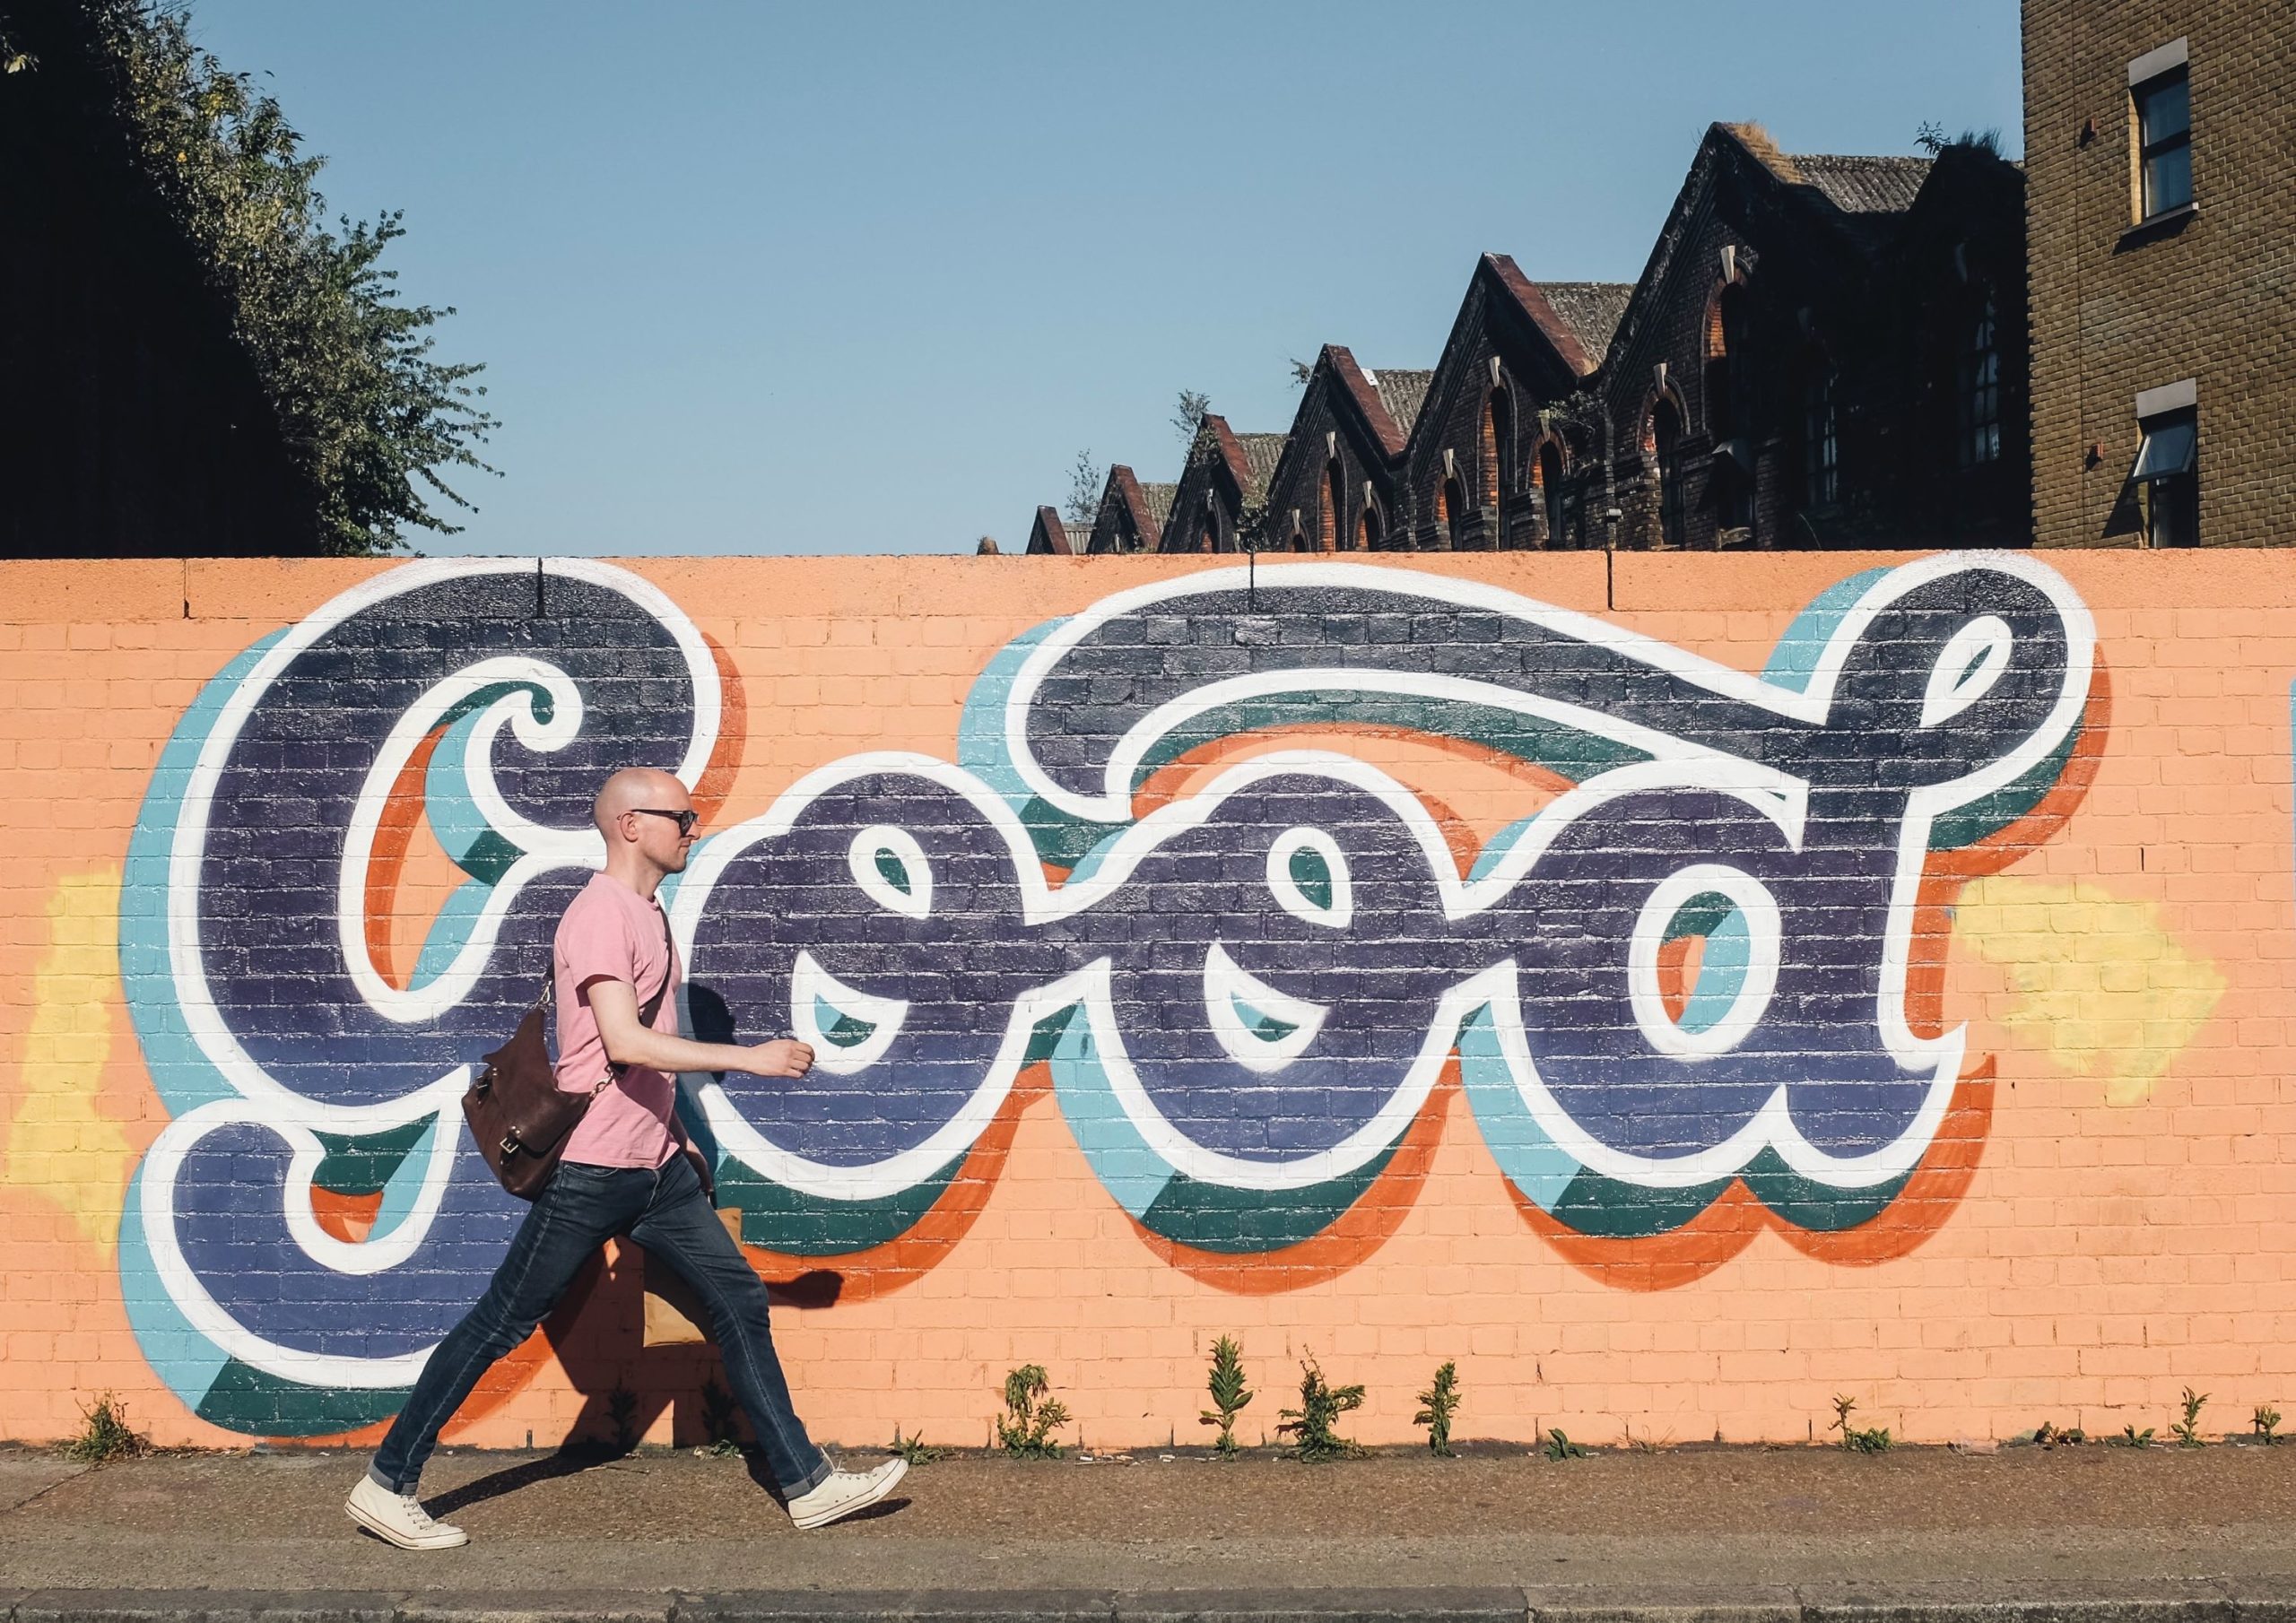 A man walks along a sunny city street with colourful graffiti artwork in the background that reads, "Good".